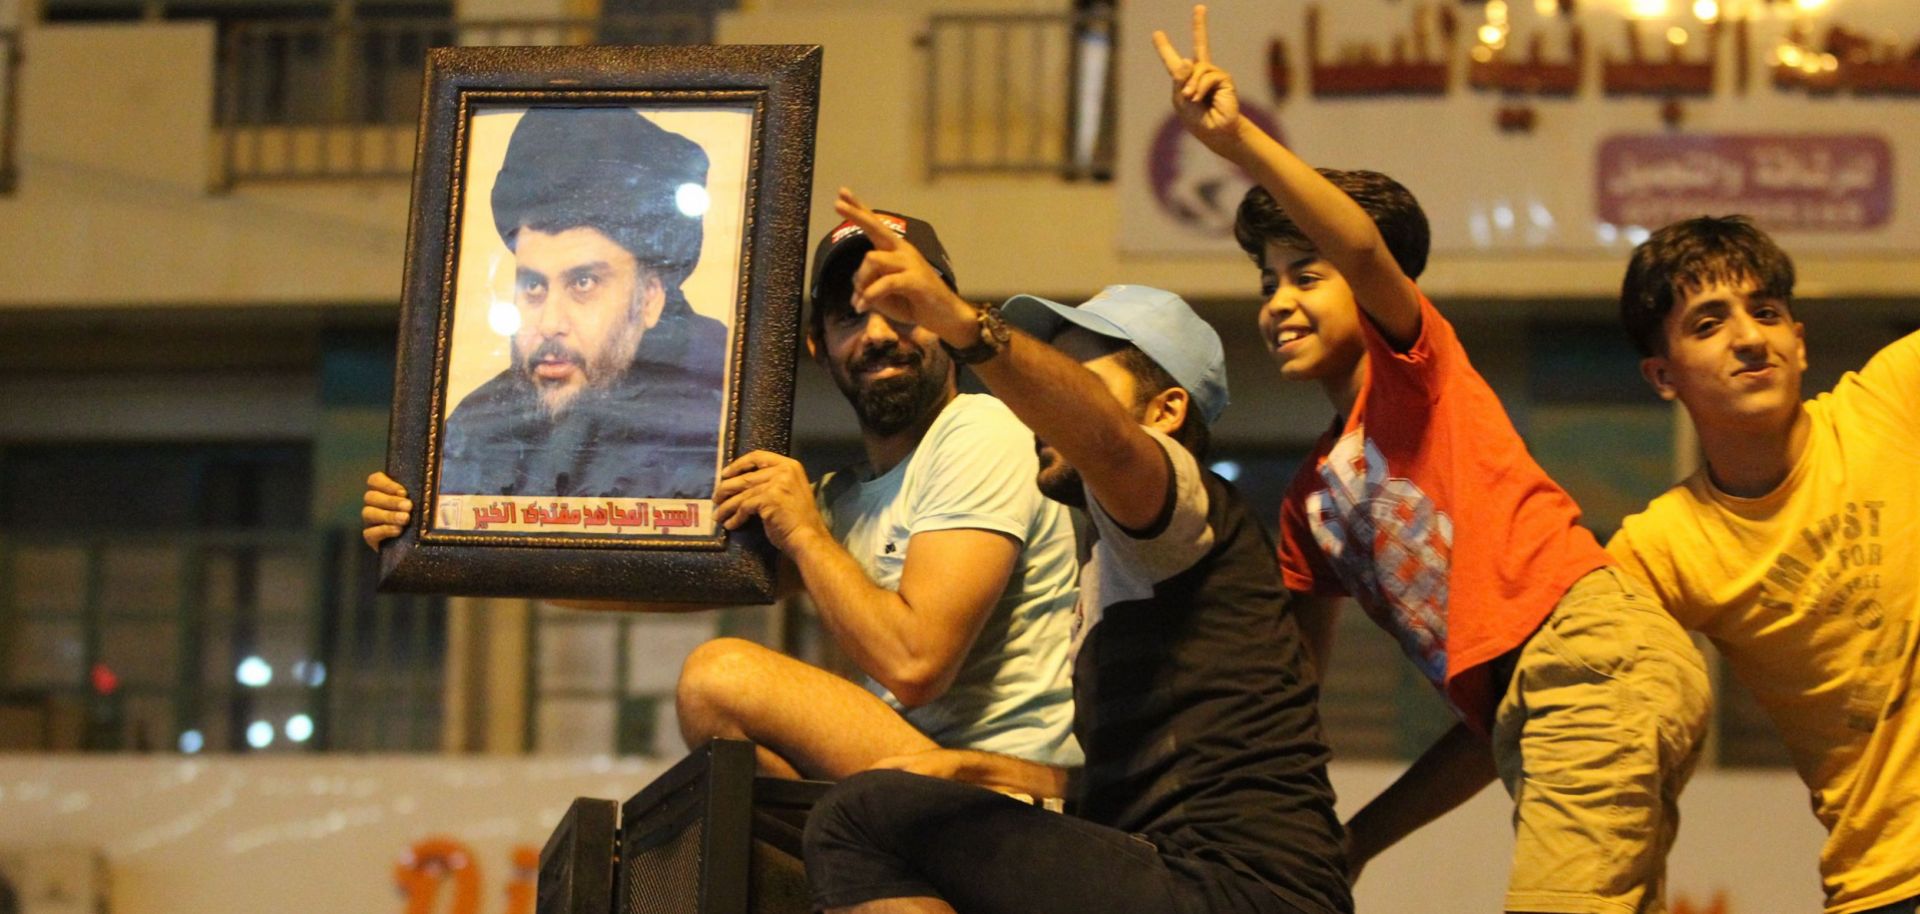 A supporter of Muqtada al-Sadr holds up a picture of the Shiite leader as Iraqis celebrate in Baghdad on May 14, 2018.